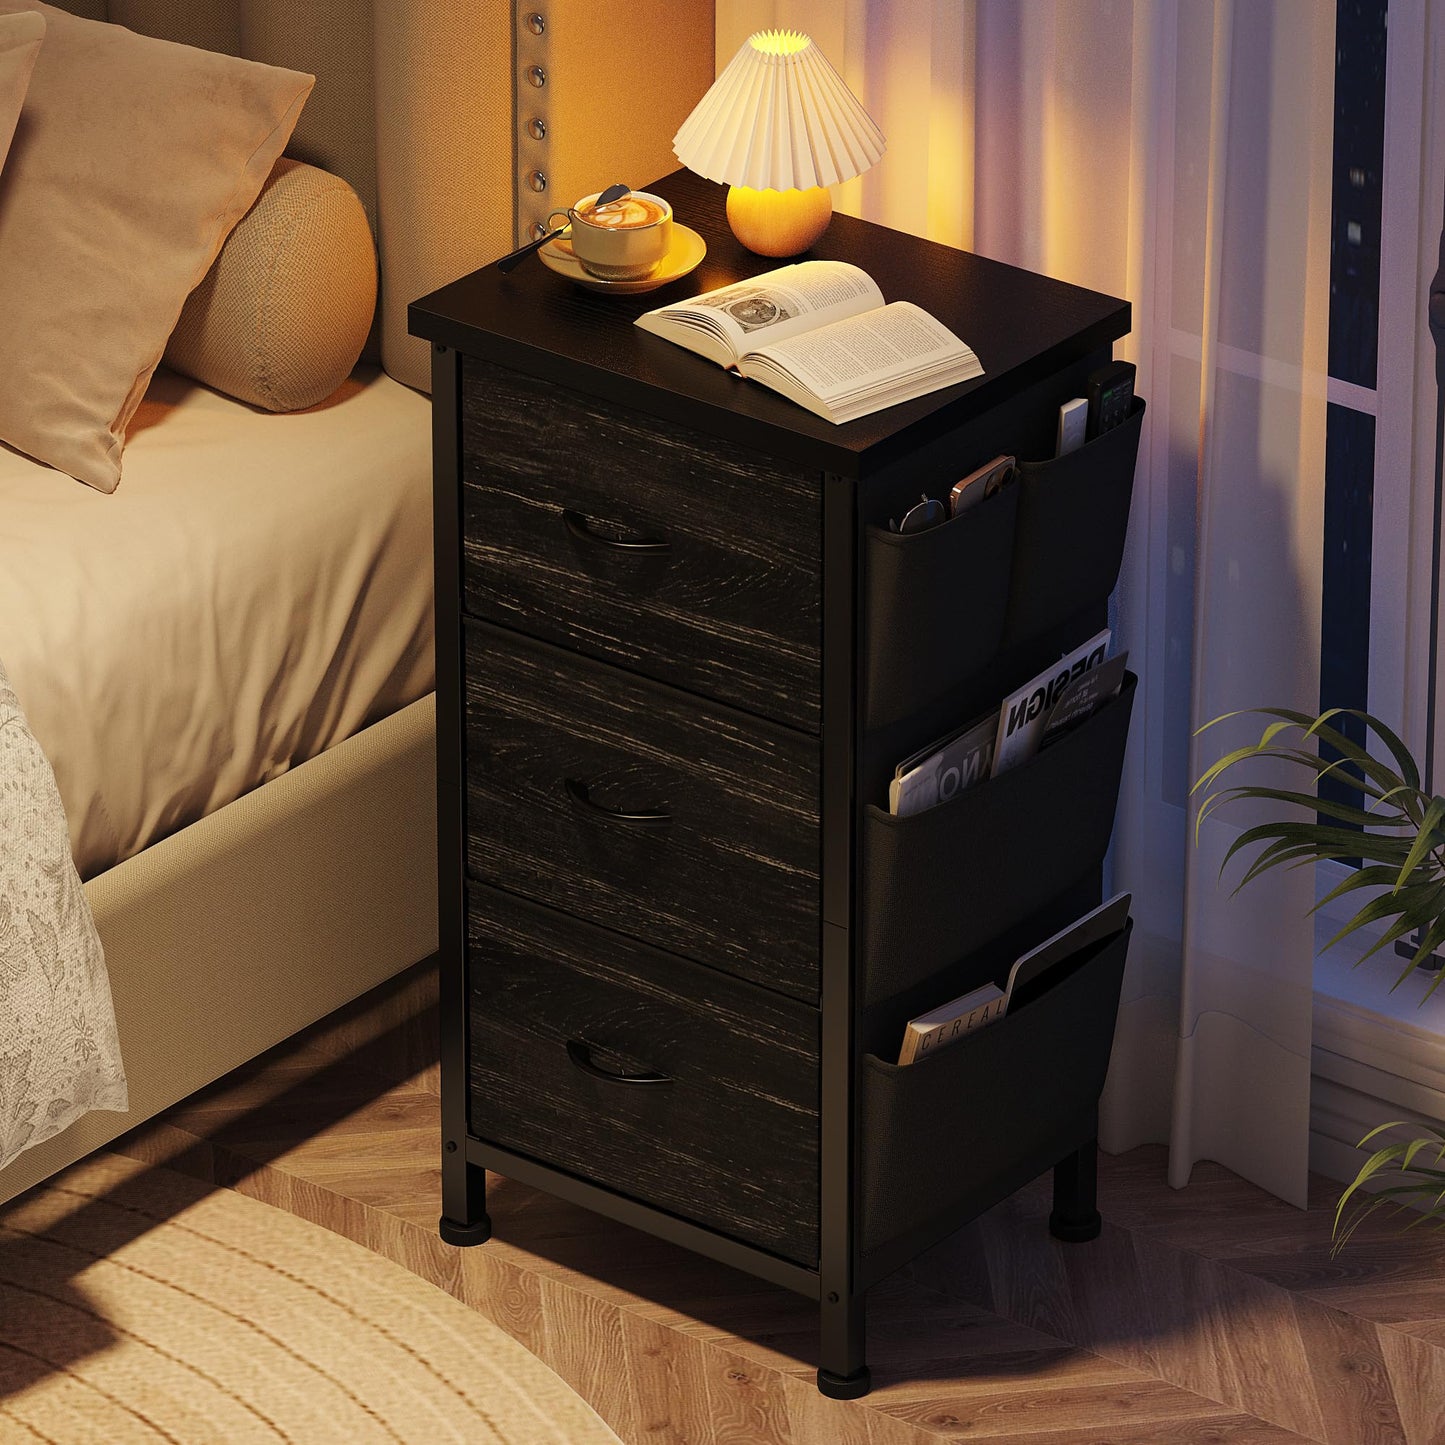 Hana Exports Nightstand with 3 Drawers, Night Stand for Bedroom, Bedside Table with Wooden Top, Sturdy Steel Frame End Table, Small Dresser for Bedroom, Living Room, Black